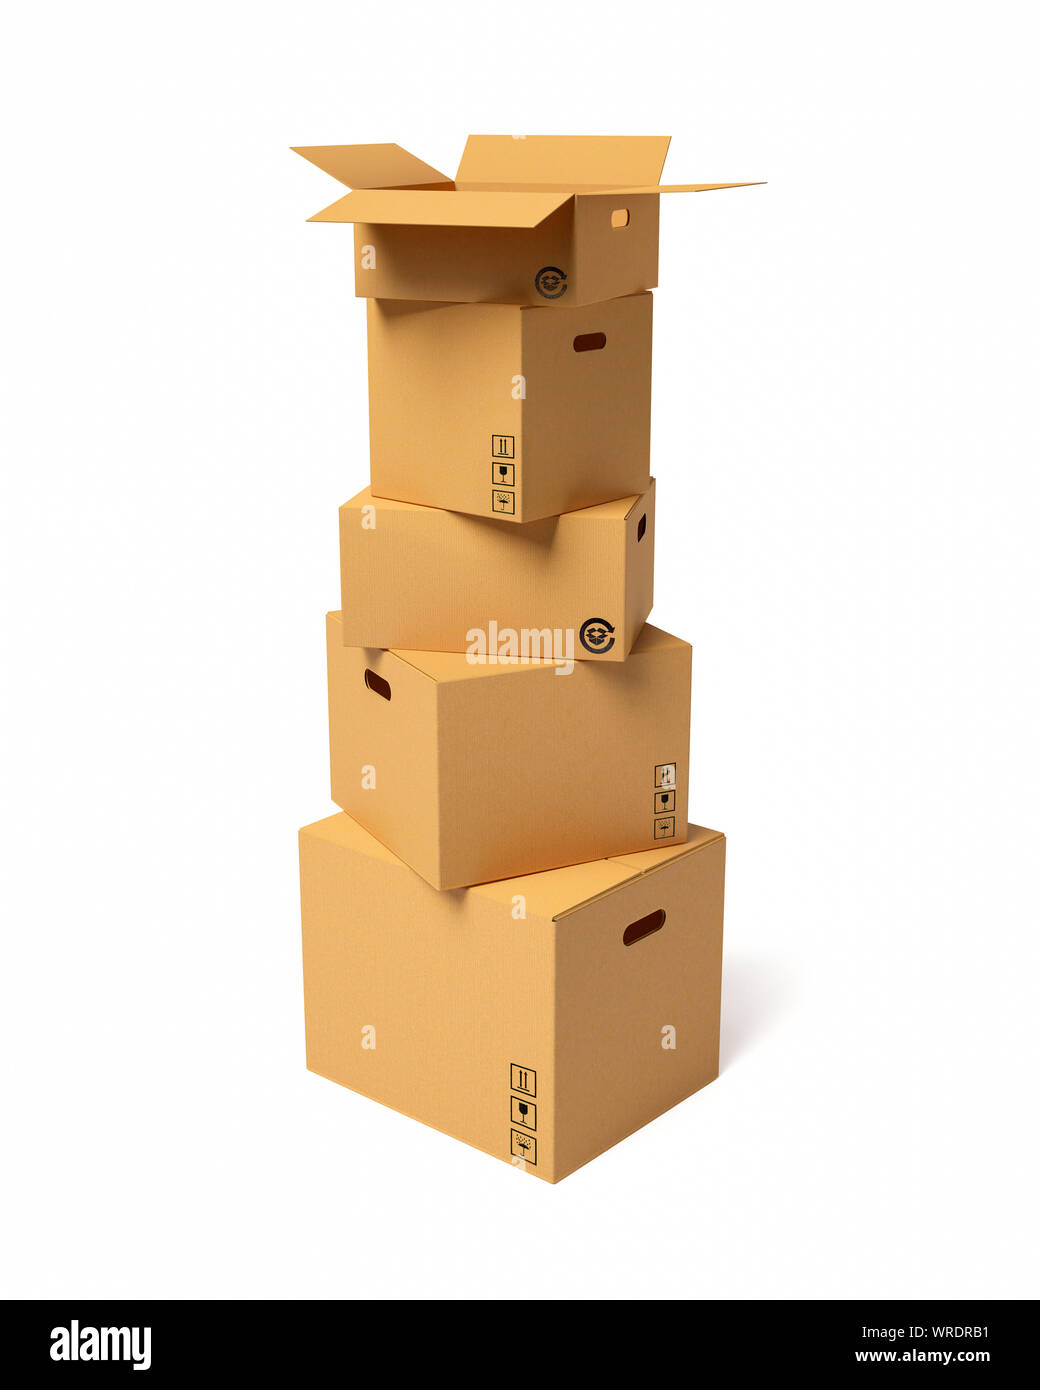 Stack of five blank cardboard boxes of different sizes, top one is open on a white background Stock Photo